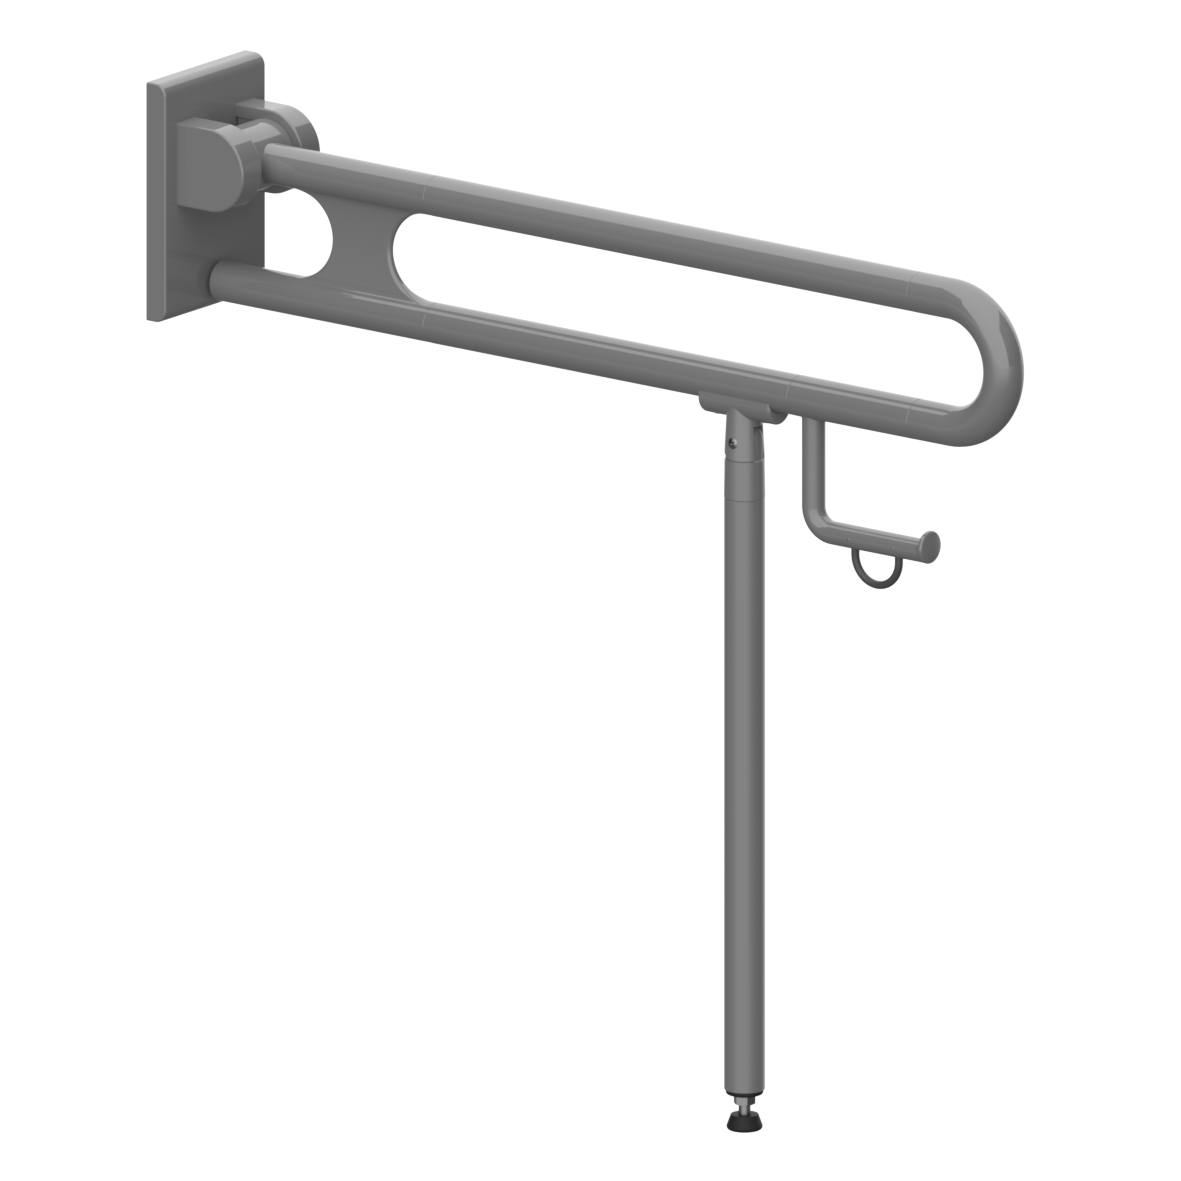 Nylon Care 300 Lift-up support rail, with toilet roll holder and floor support (750 mm), left and right, L = 850 mm, Dark grey